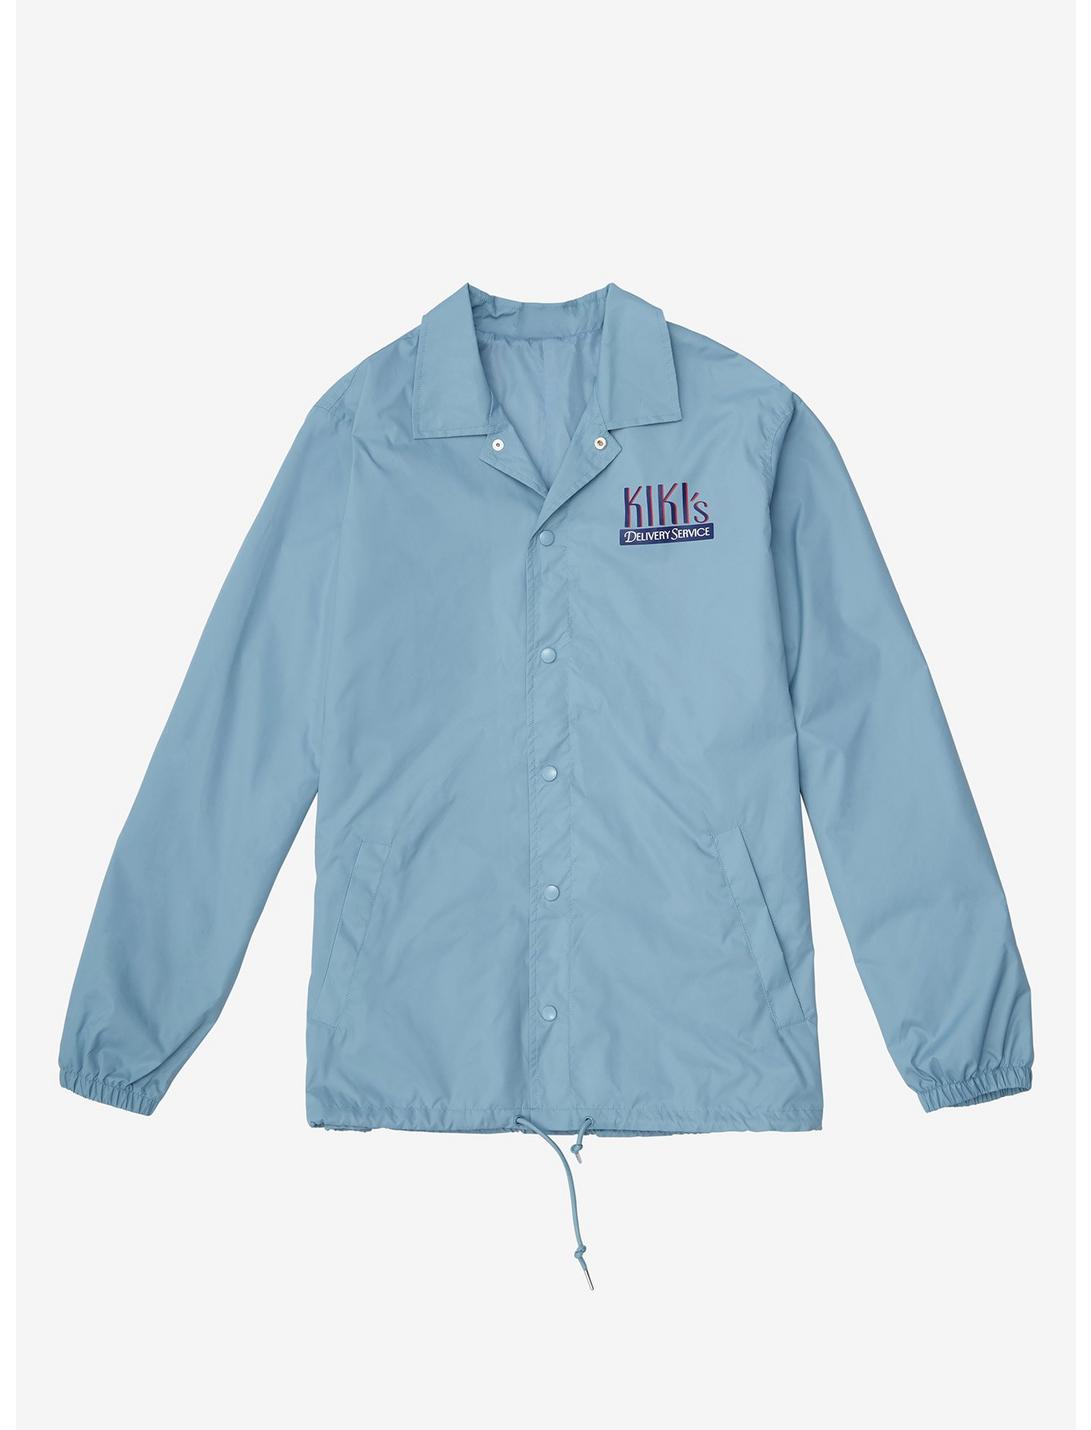 Our Universe Studio Ghibli Kiki's Delivery Service Coach's Jacket - BoxLunch Exclusive, LIGHT BLUE, hi-res